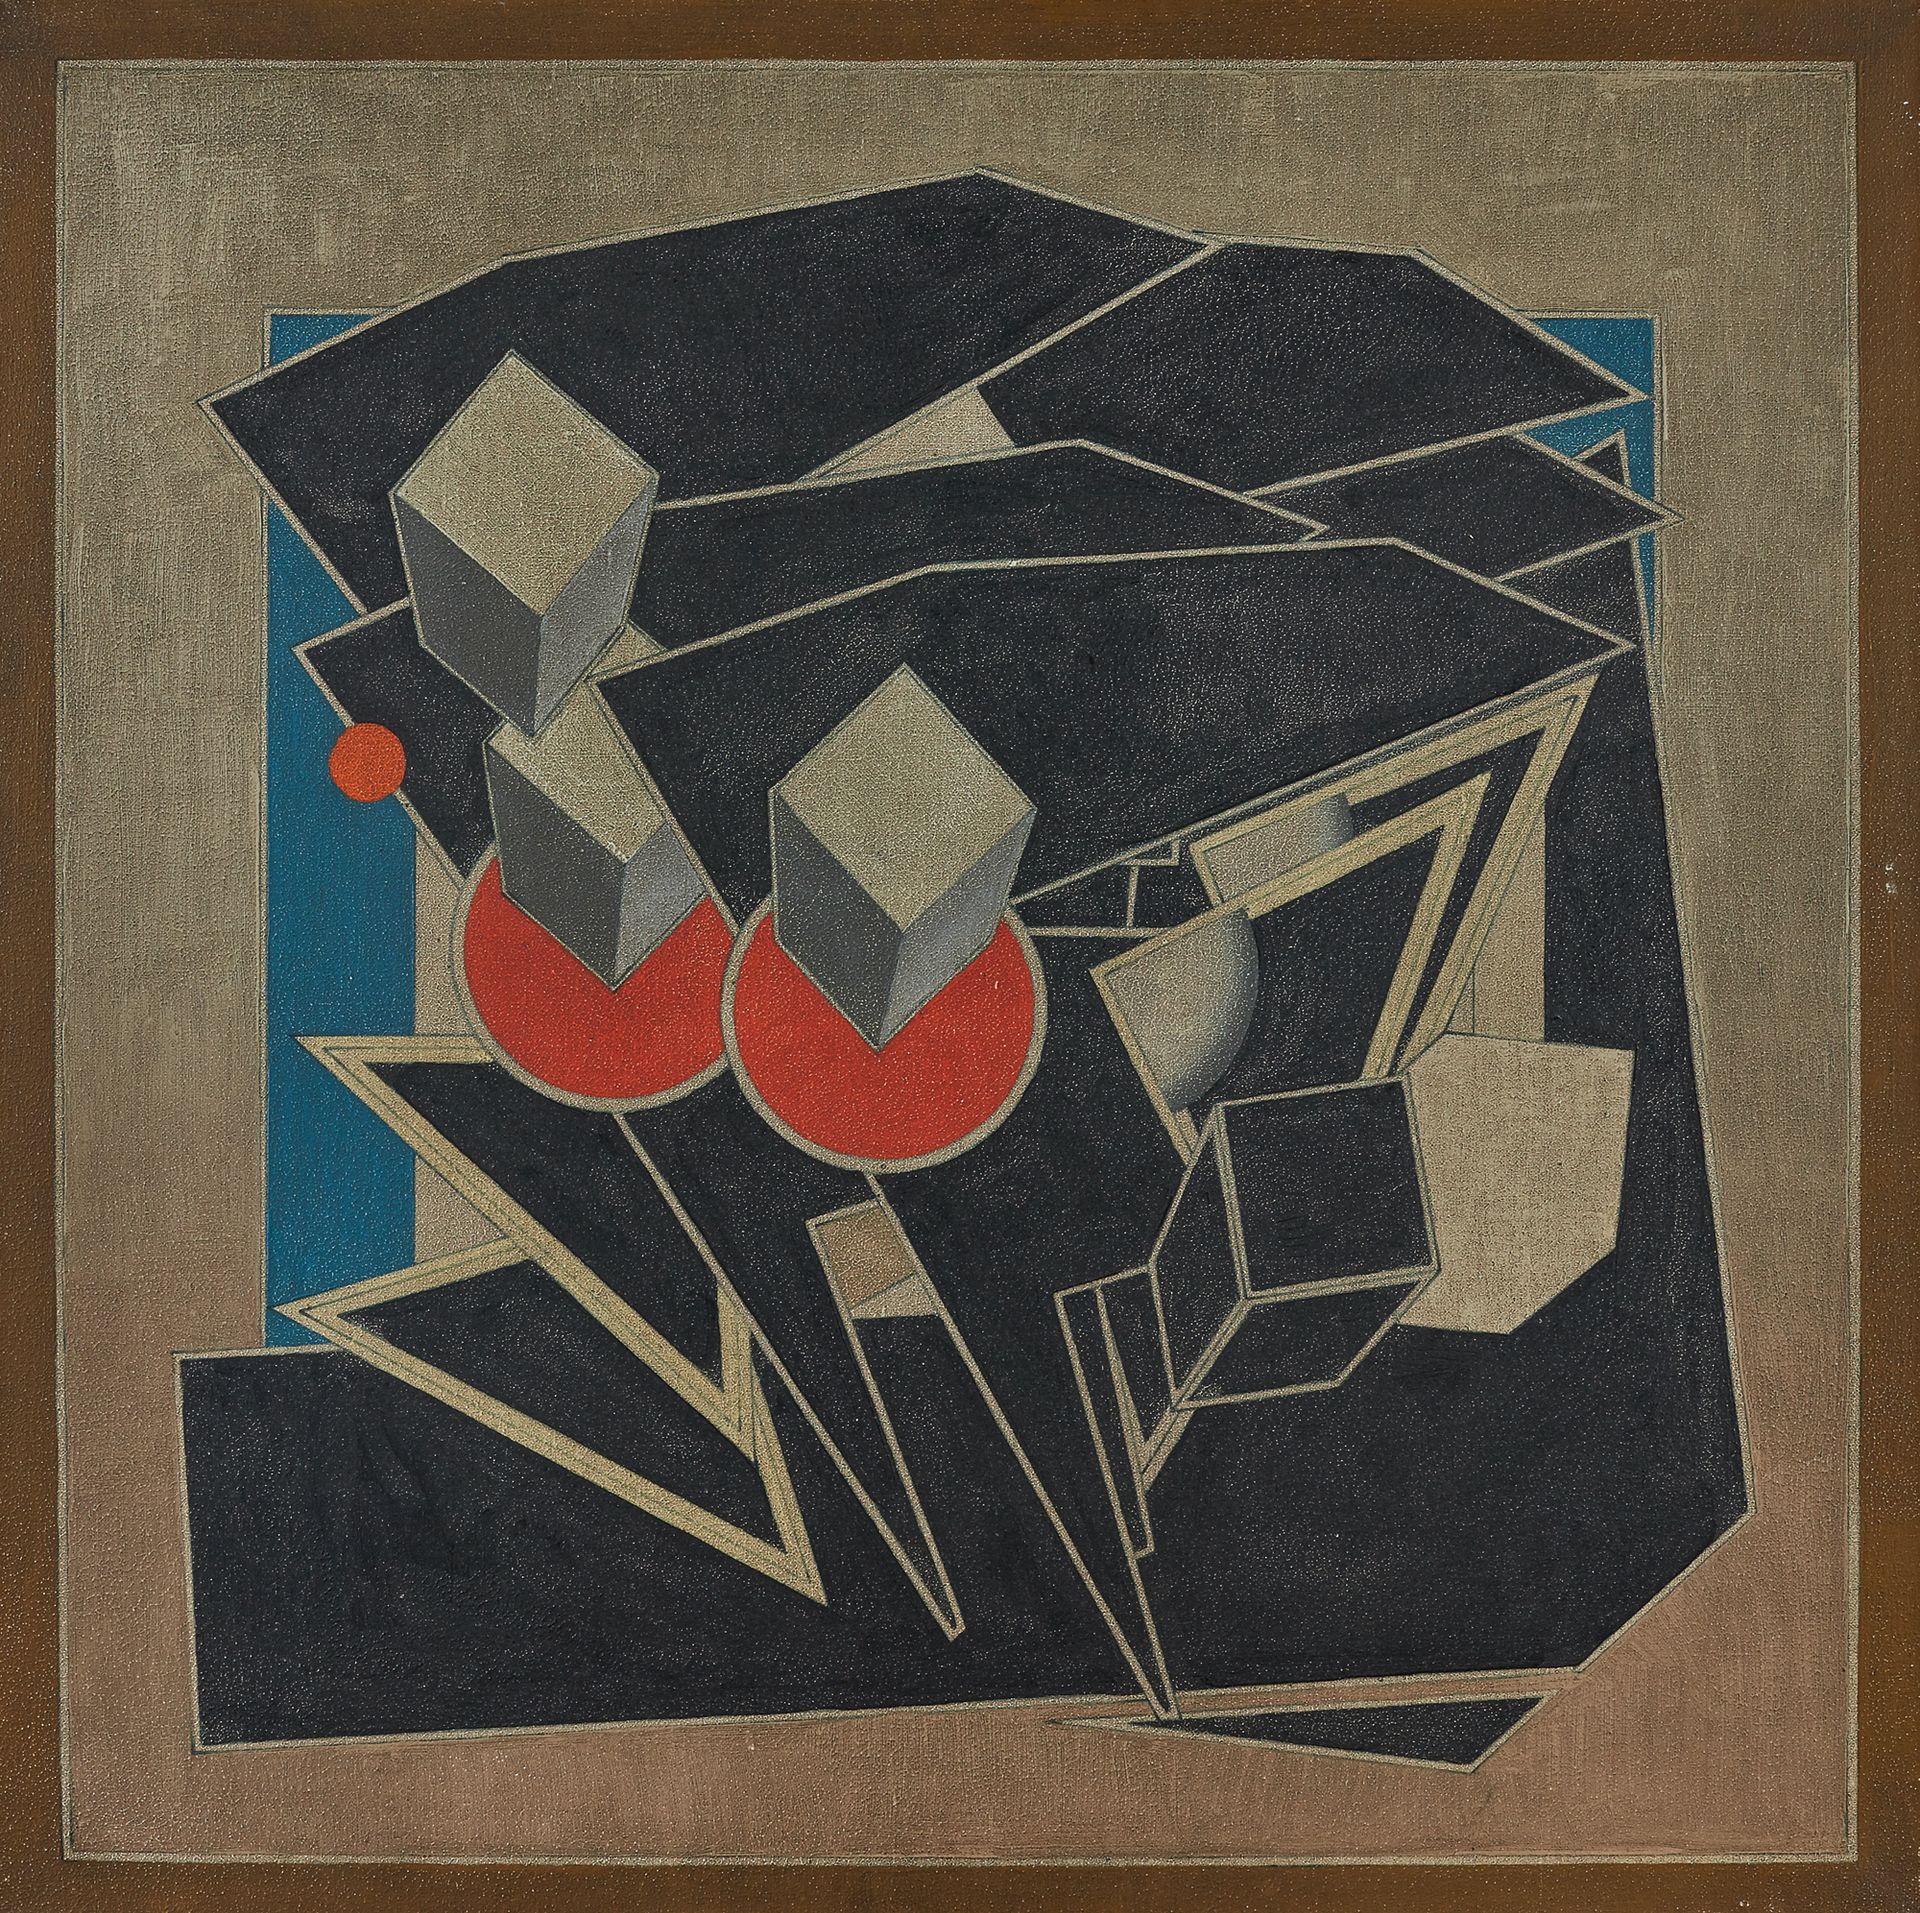 Alain Le YAOUANC (1940) Composition
Mixed media on canvas, unsigned
80 x 80 cm